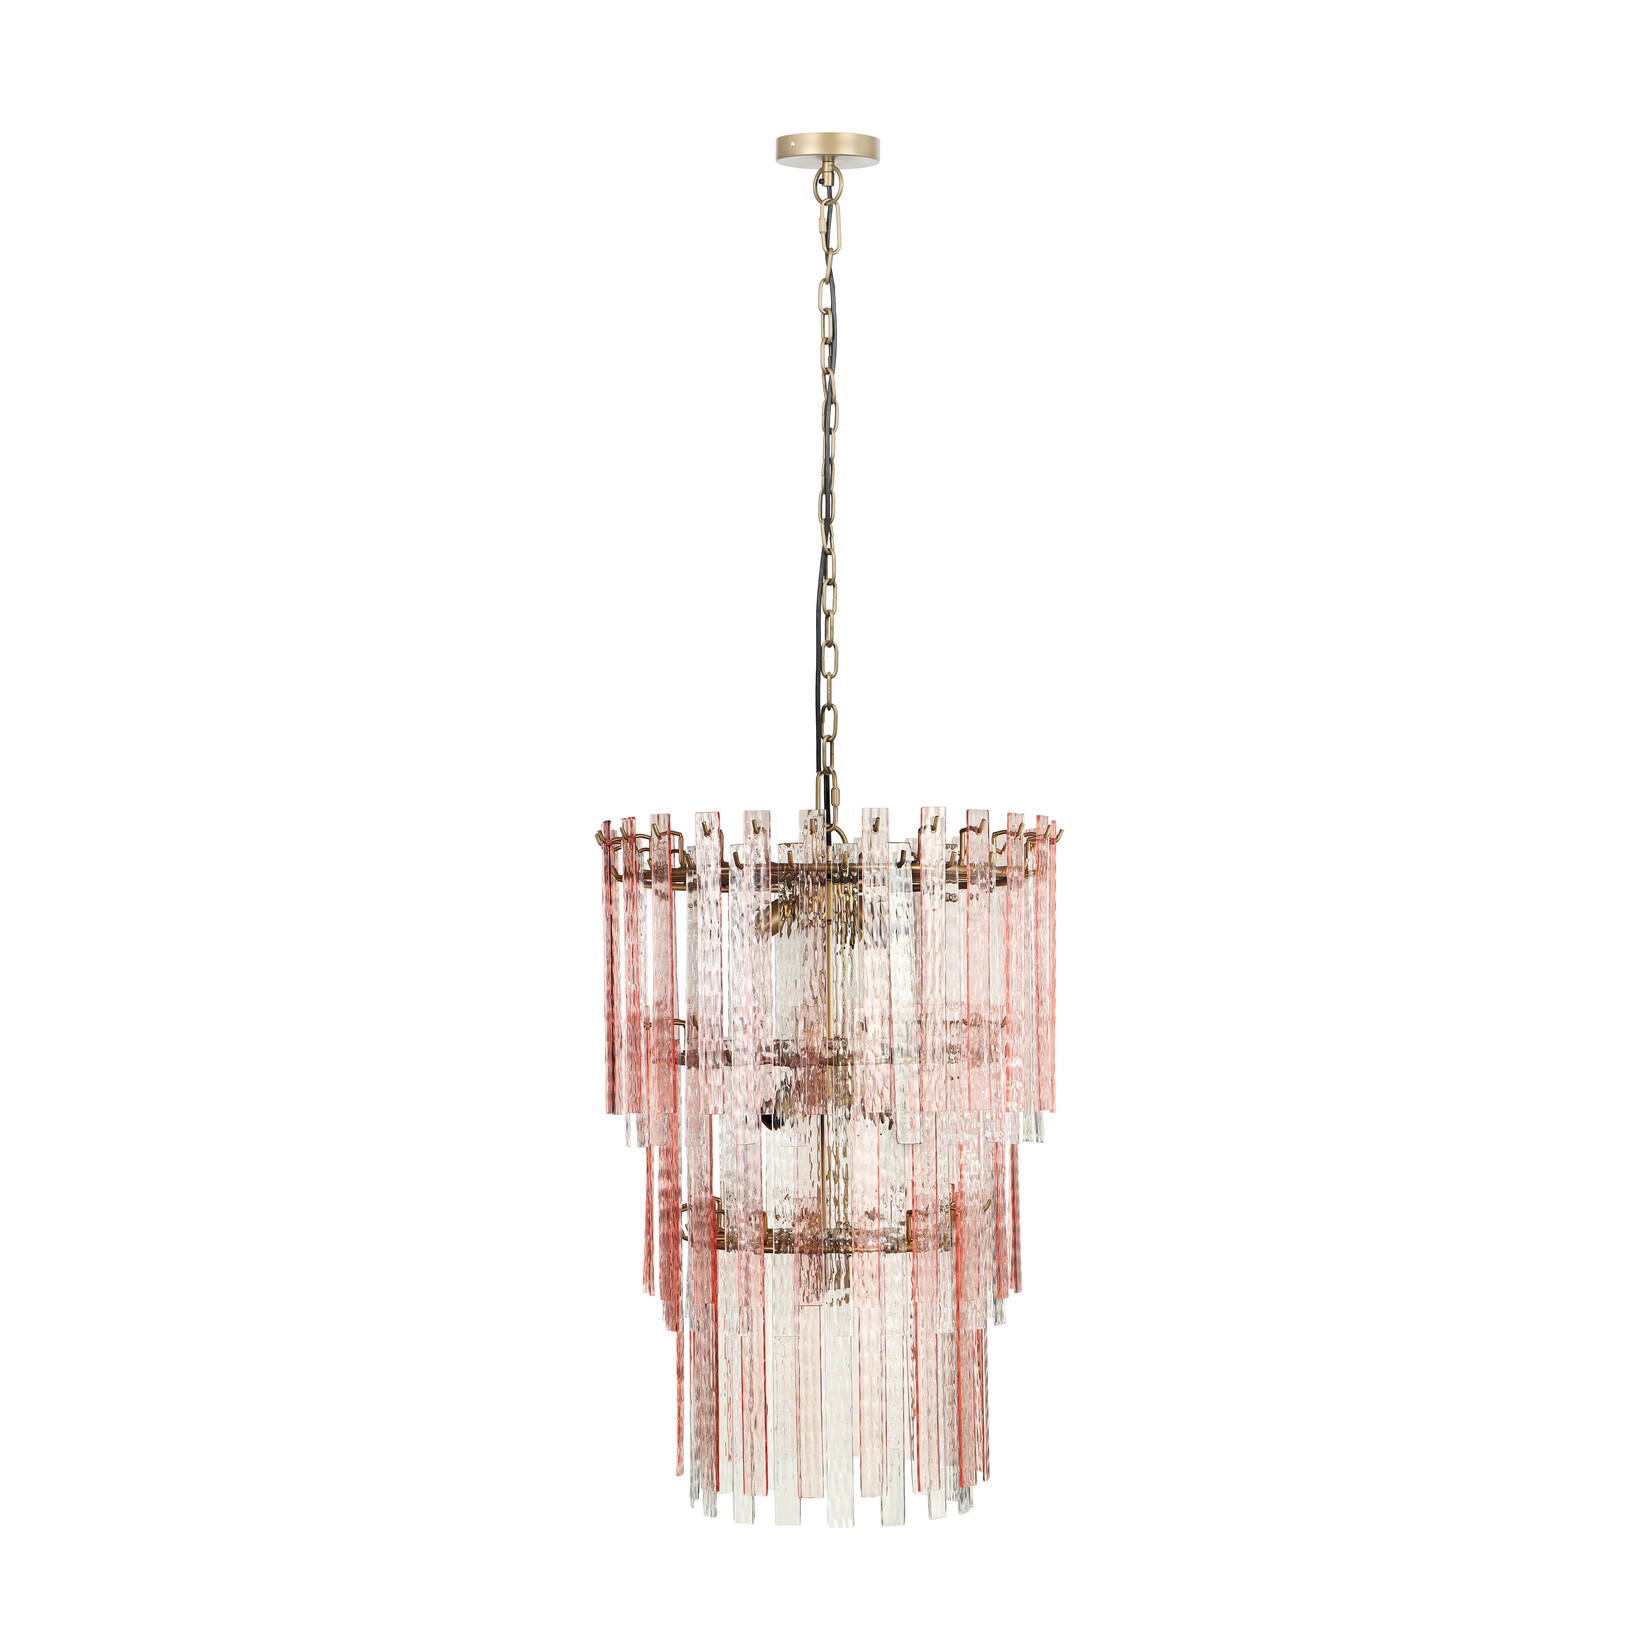 Tov SHIRE PINK ACRYLIC 3-TIER CHANDELIER